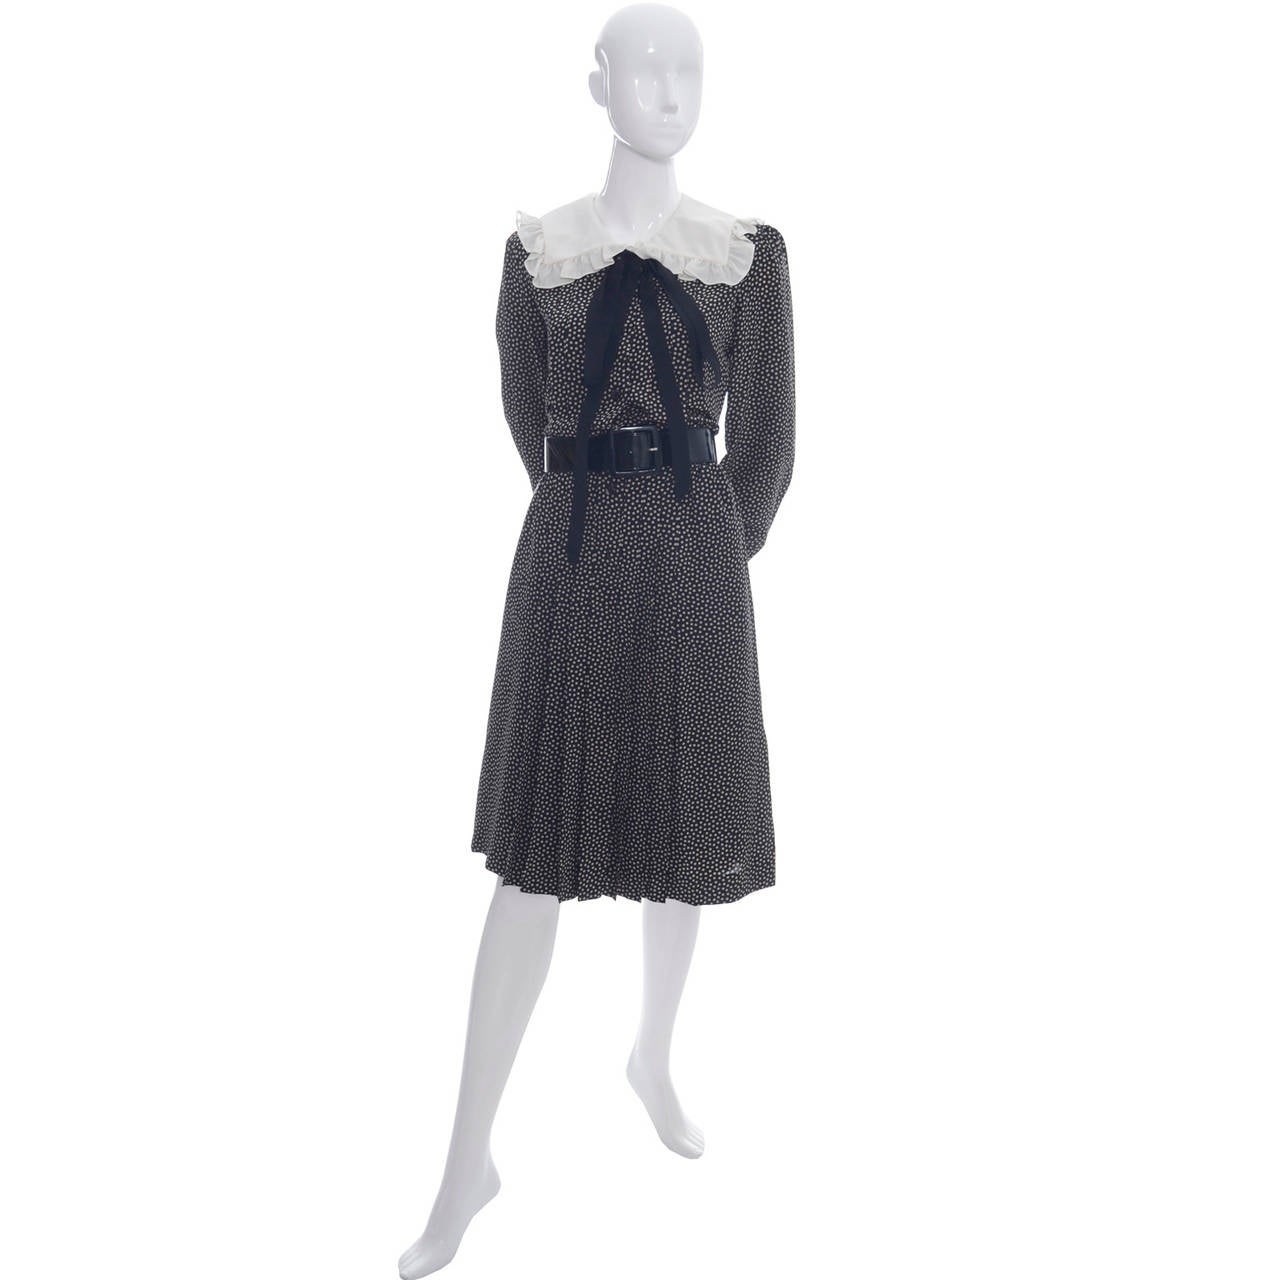 This vintage dress is from the Yves Saint Laurent Rive Gauche collection and was made in the late 1970's.  The dress is black with creamy pale ecru dots and has a white ruffled collar. There is black trim on the cuffs and a black silk tie under the